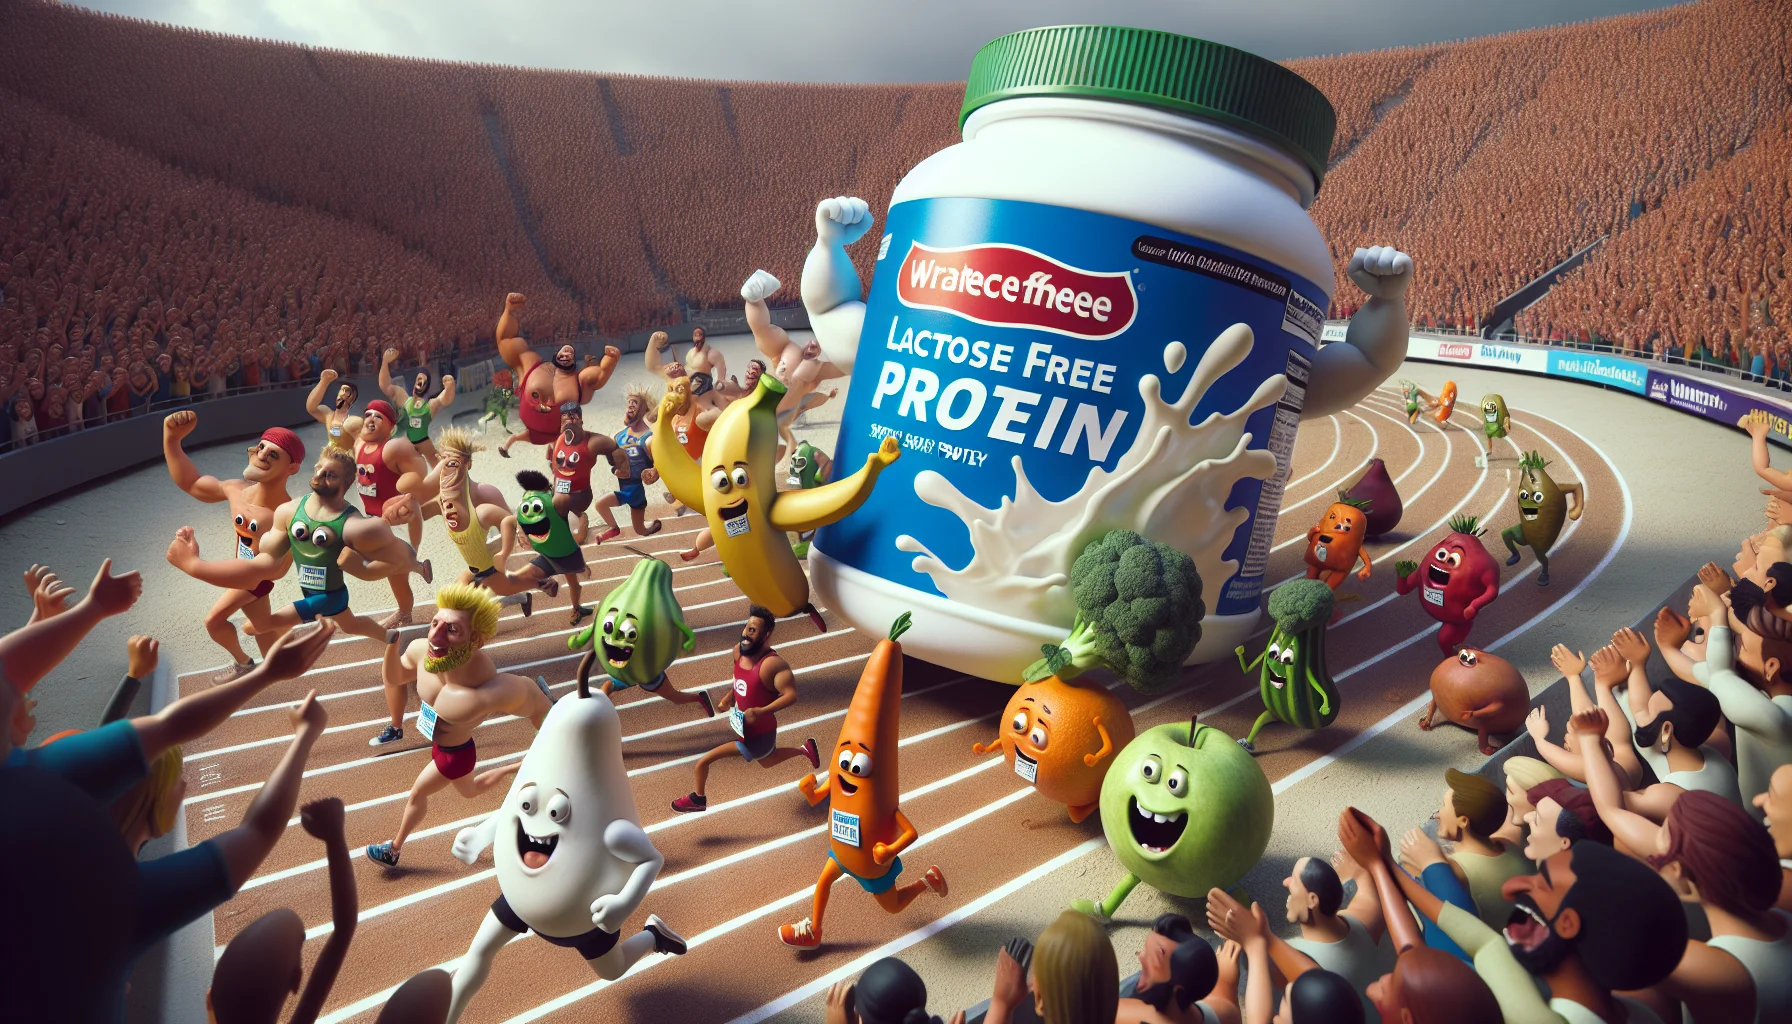 Create a highly detailed image, exhibiting a humorous scene in which a giant, animated container of lactose-free whey protein is participating in a marathon race. The container proudly displays its 'Lactose-Free' label while overtaking a group of perplexed fruits and vegetables, who are also anthropomorphized and in the race. The background shows an audience of diverse people from various descents such as Caucasian, Hispanic, and South Asian, both male and female, cheering enthusiastically. Everyone is laughing and having a great time, and this humorous tableau is meant to promote the use of sports supplements in a lighthearted way.